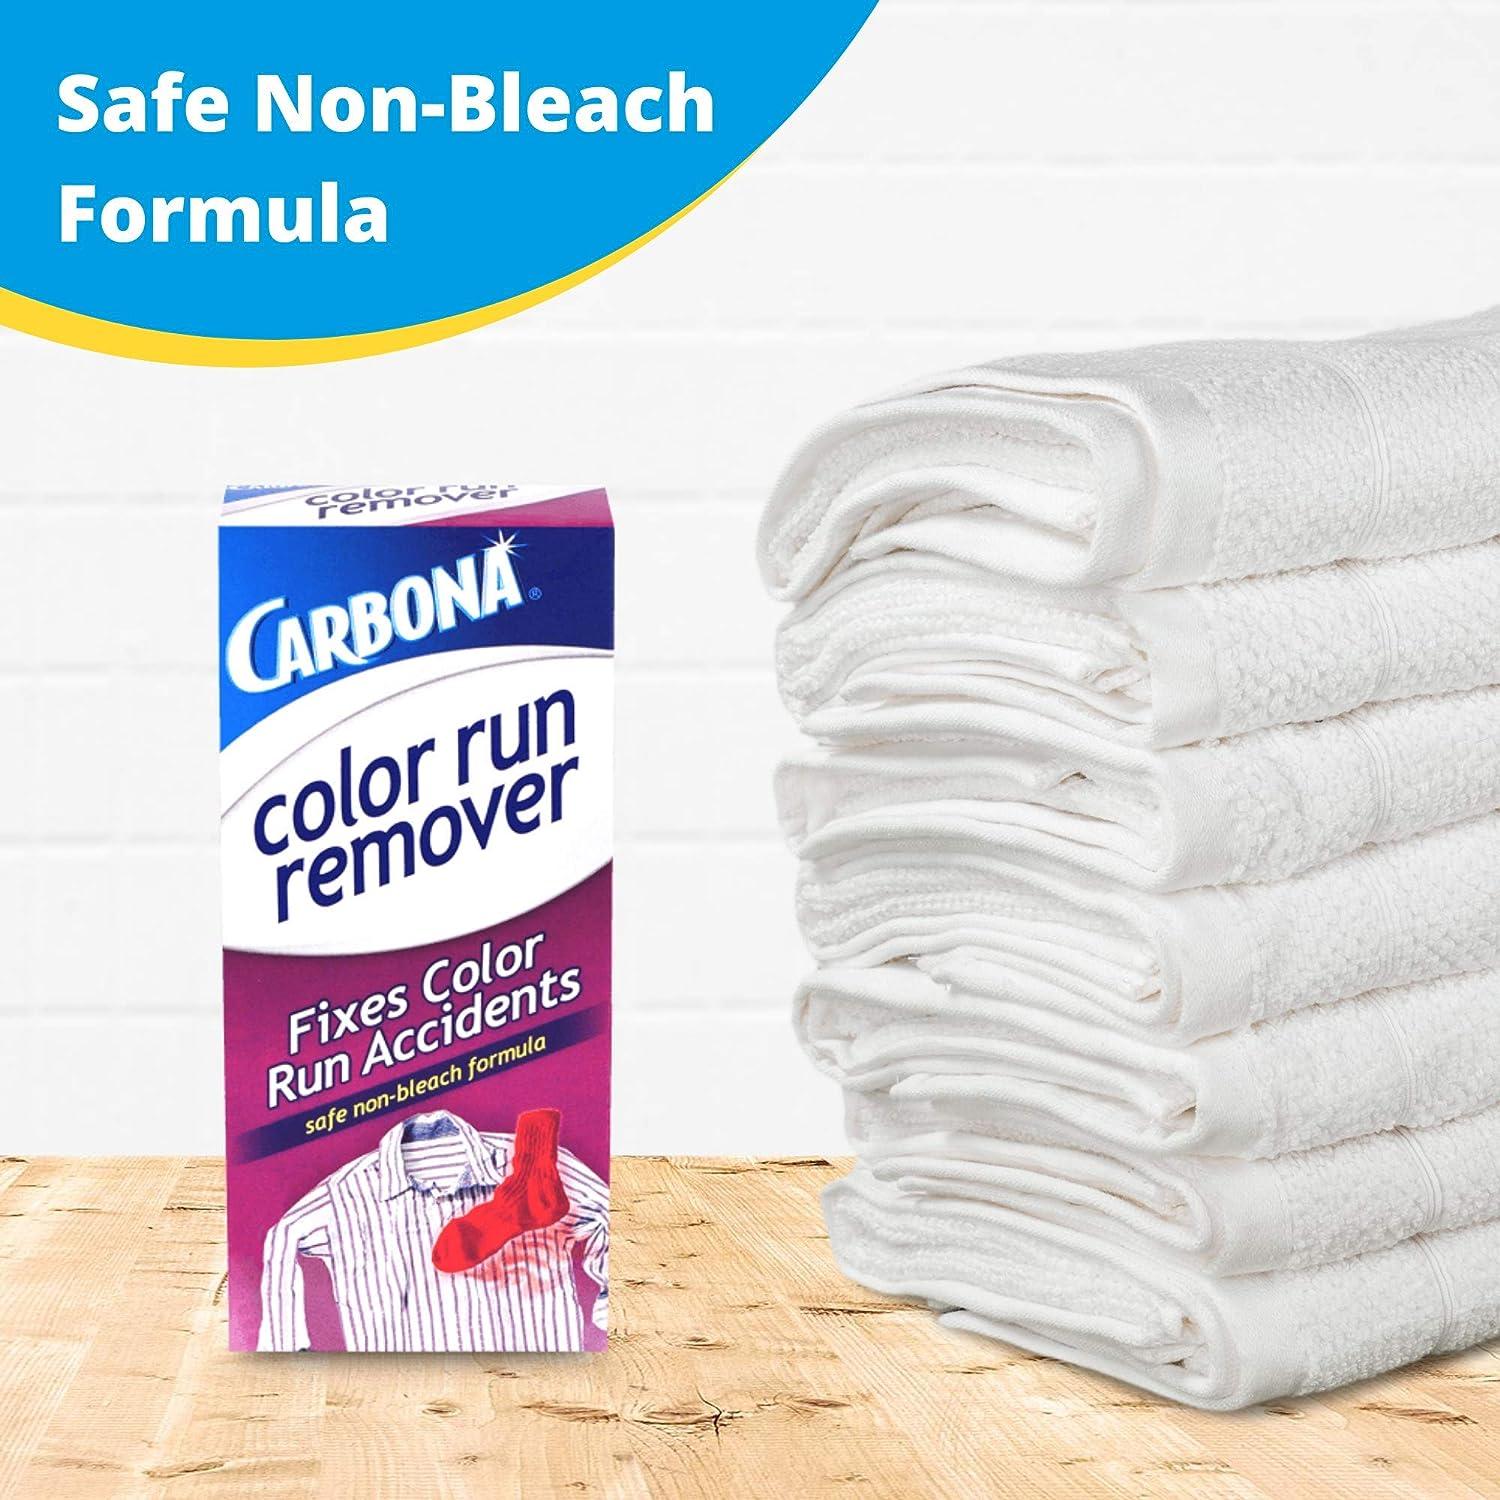 Lot of 2 packs CARBONA Color Run Stain Remover - 2.6 oz New